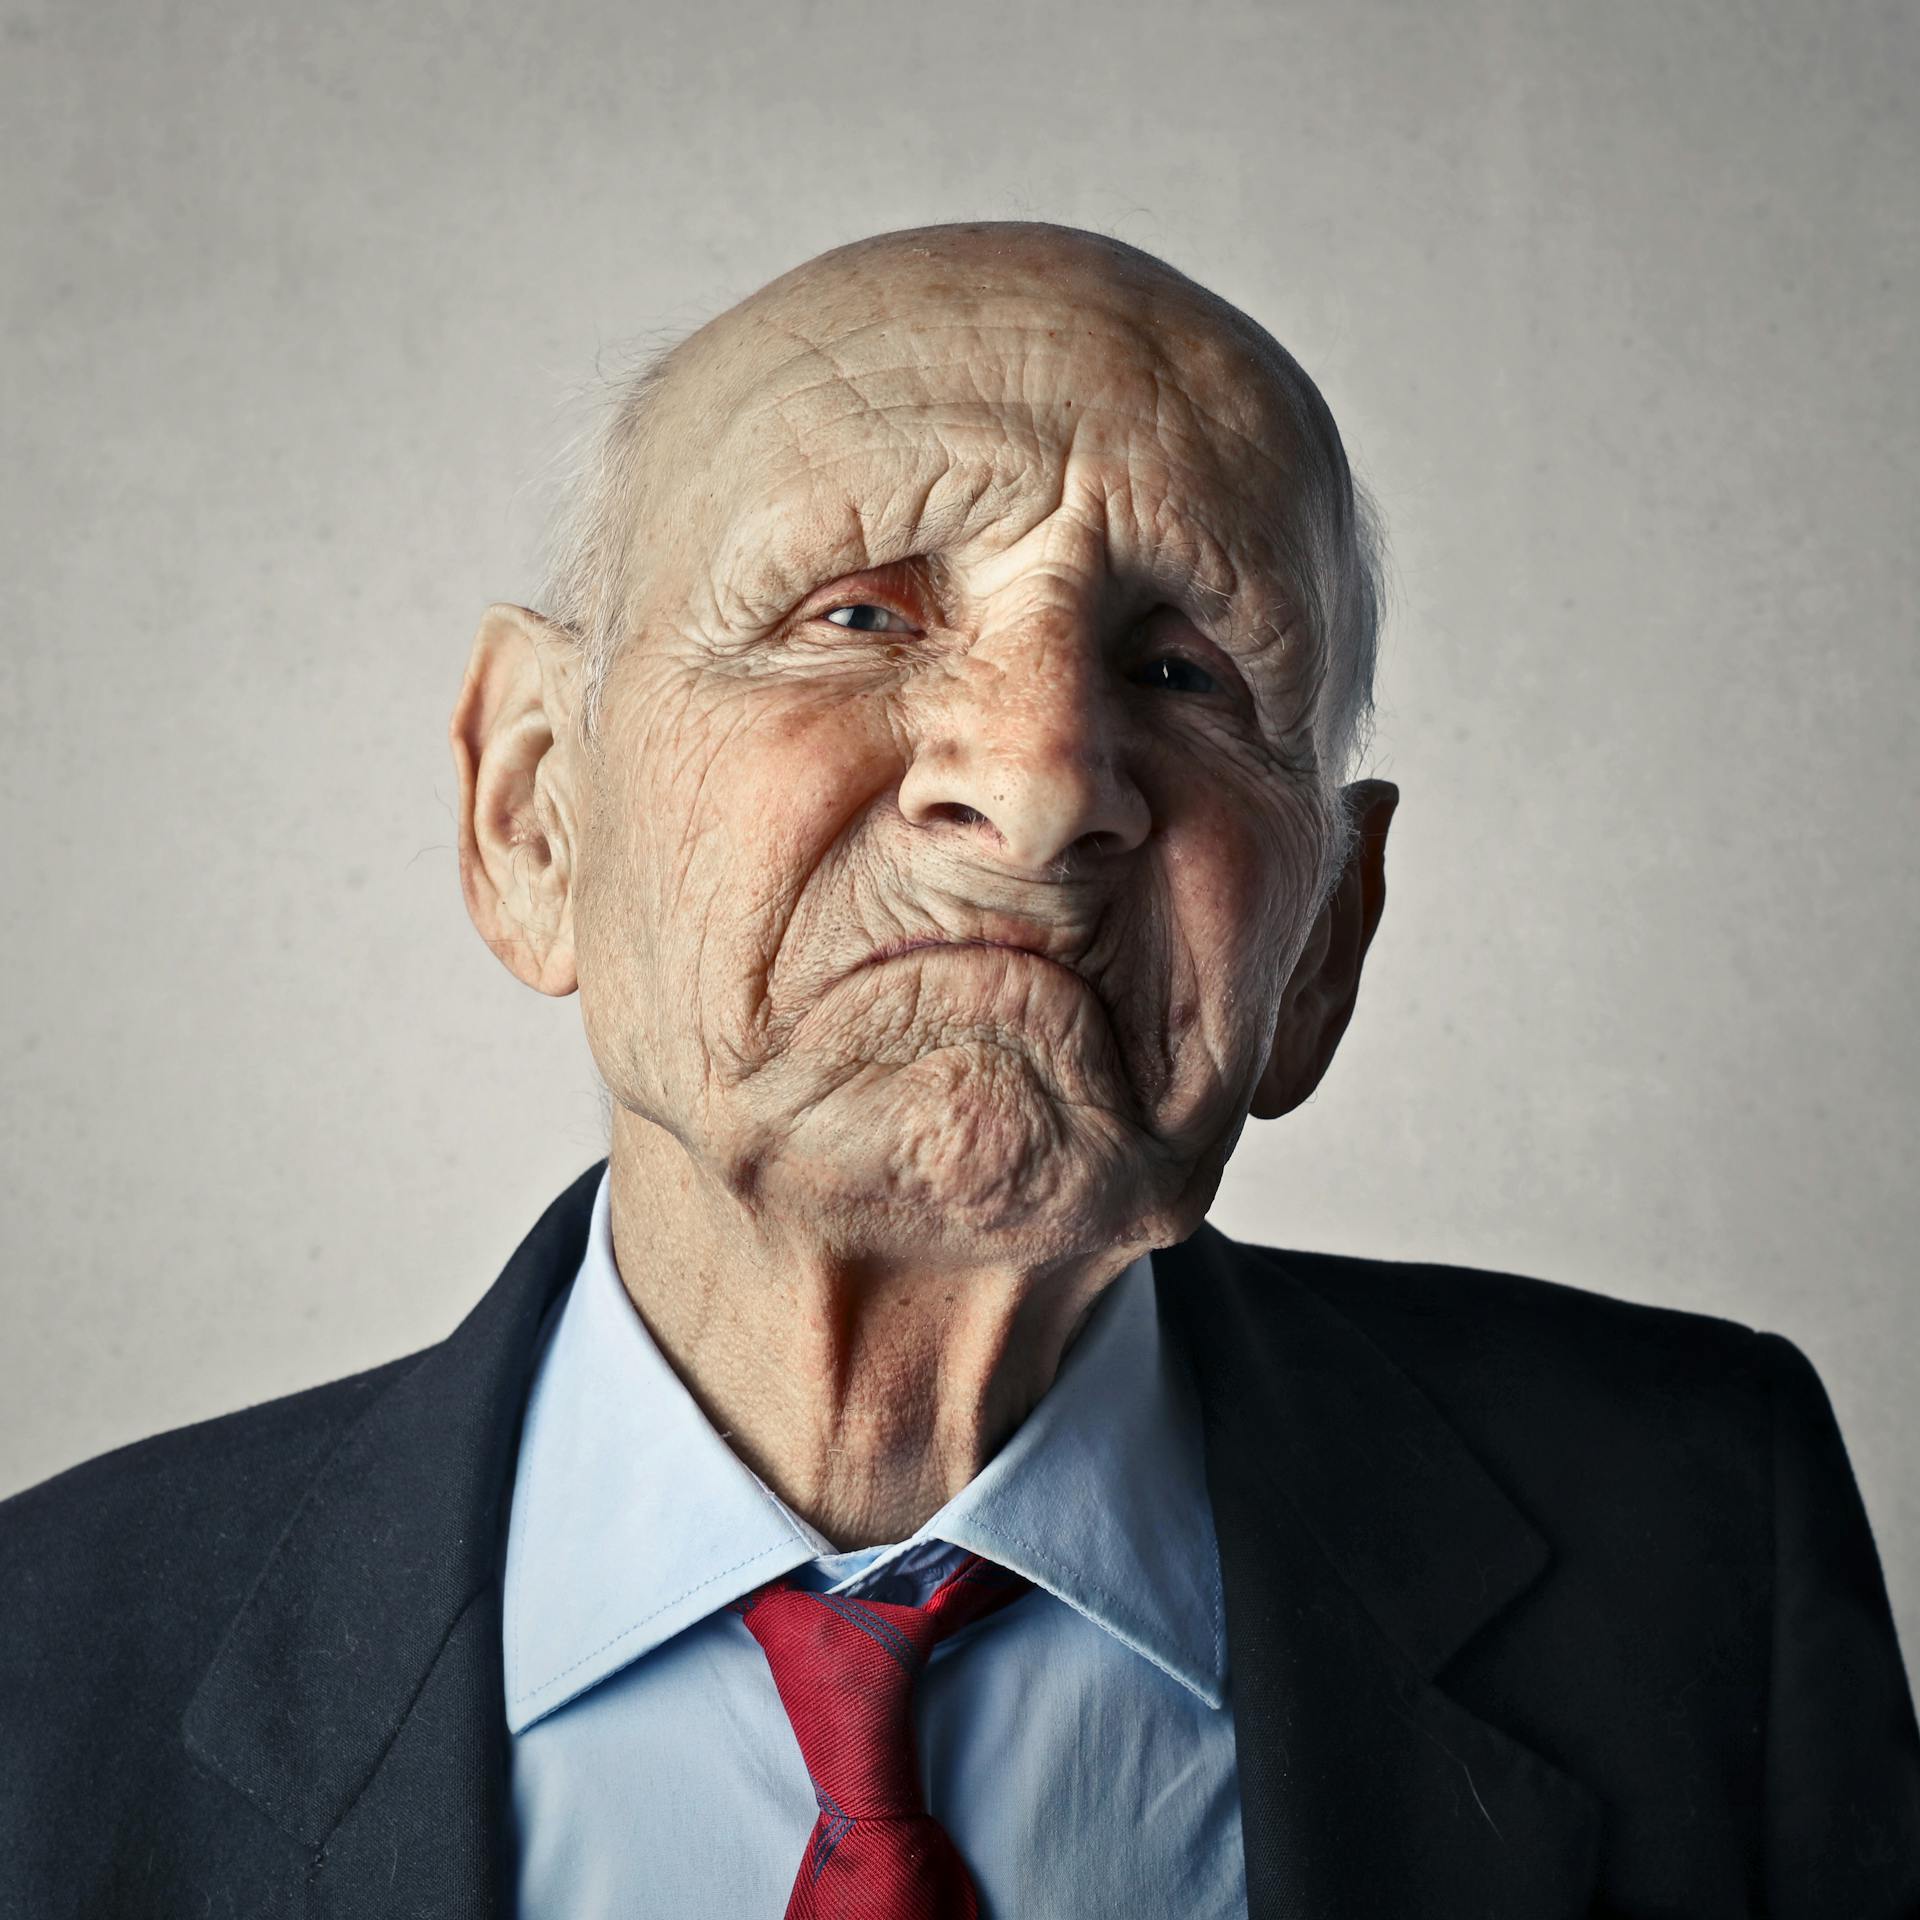 An angry old man | Source: Pexels